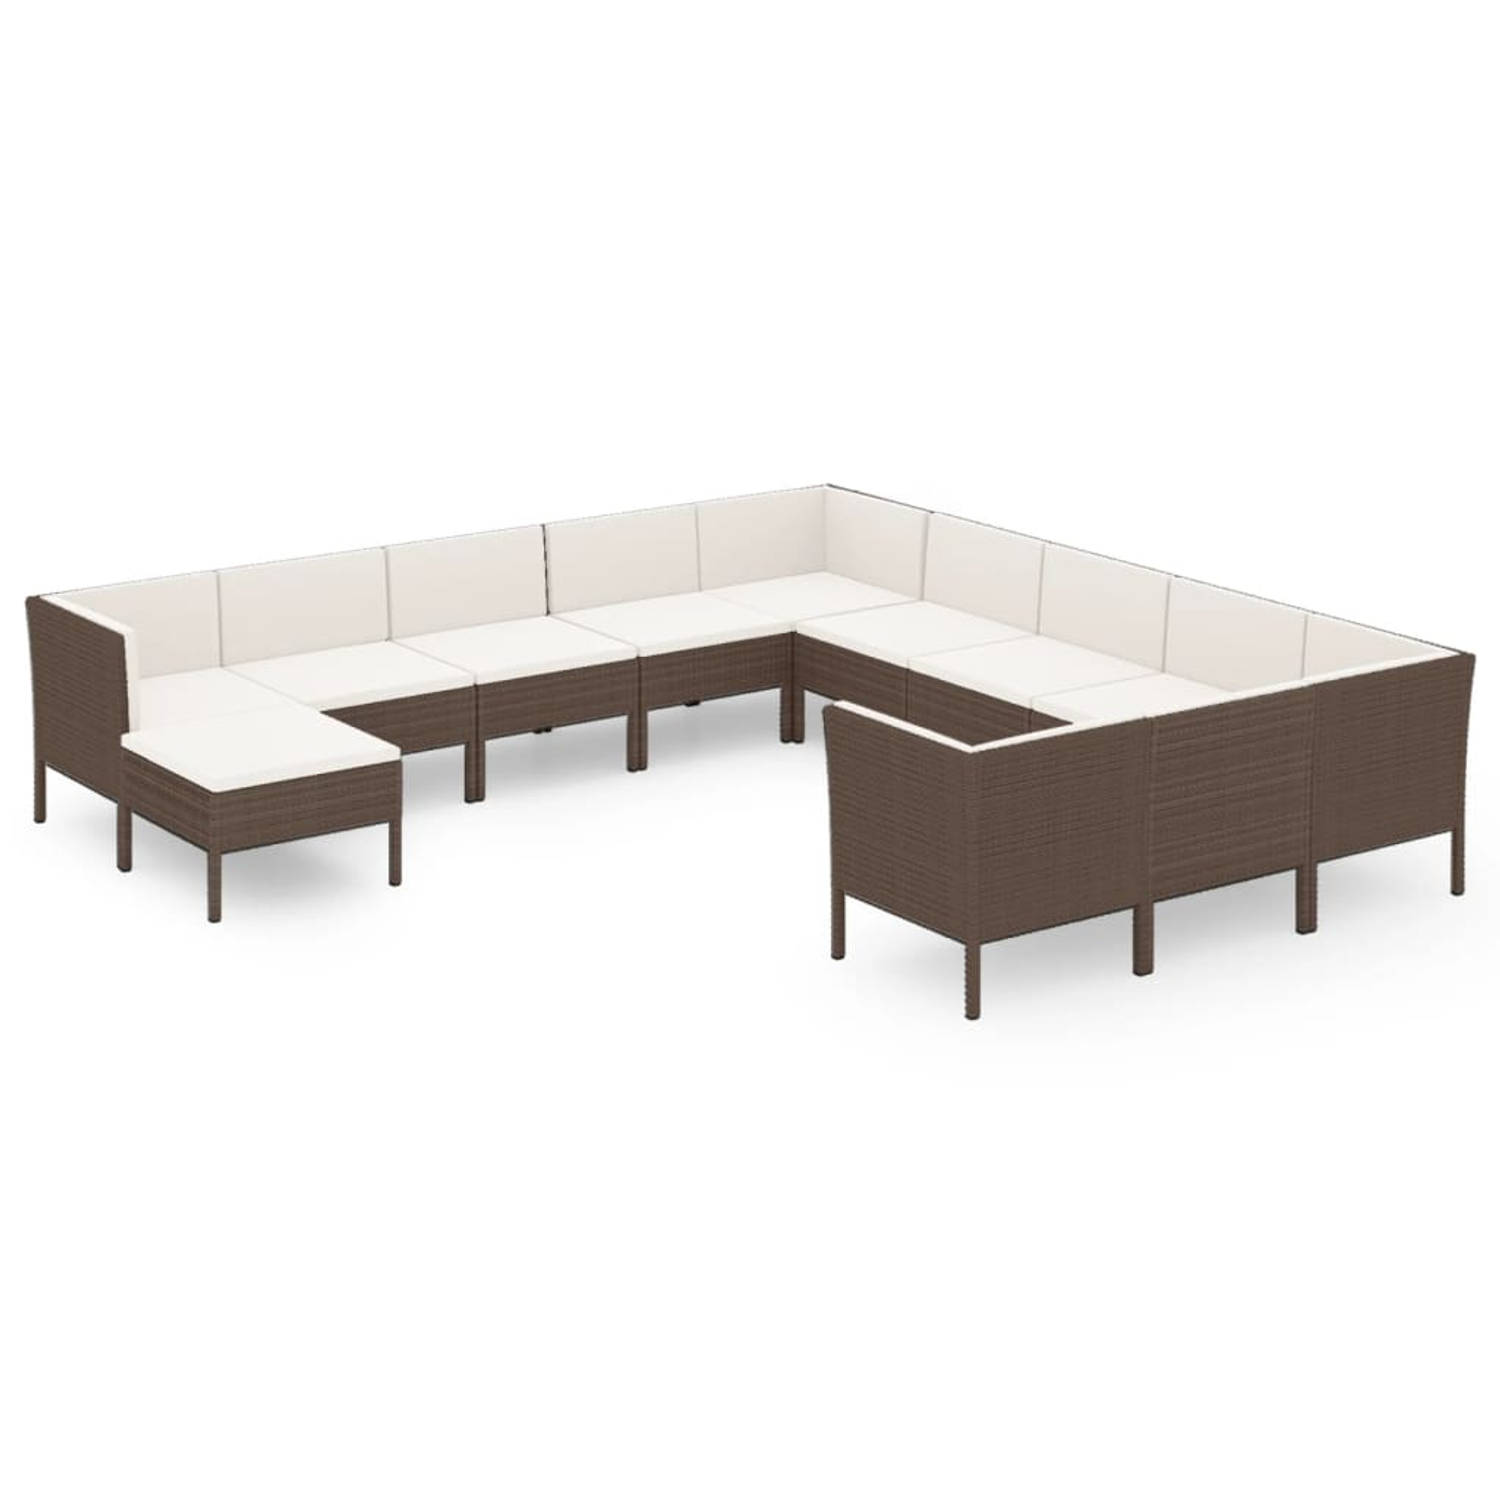 The Living Store Loungeset - Modulaire tuinmeubelset - Bruin - PE-rattan - Gepoedercoat staal - Incl - kussens